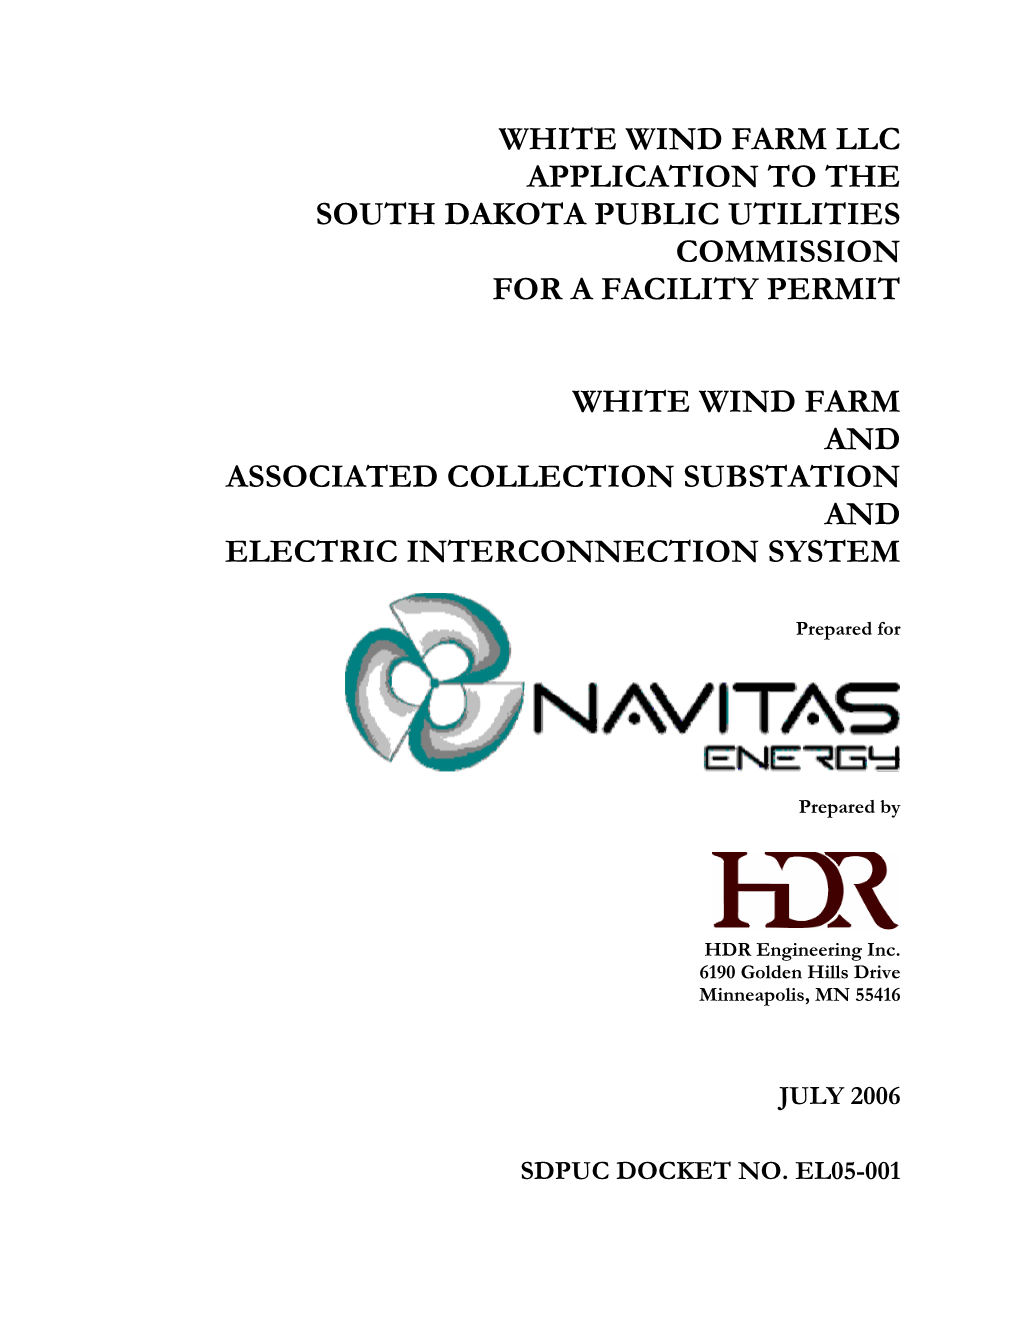 White Wind Farm Llc Application to the South Dakota Public Utilities Commission for a Facility Permit